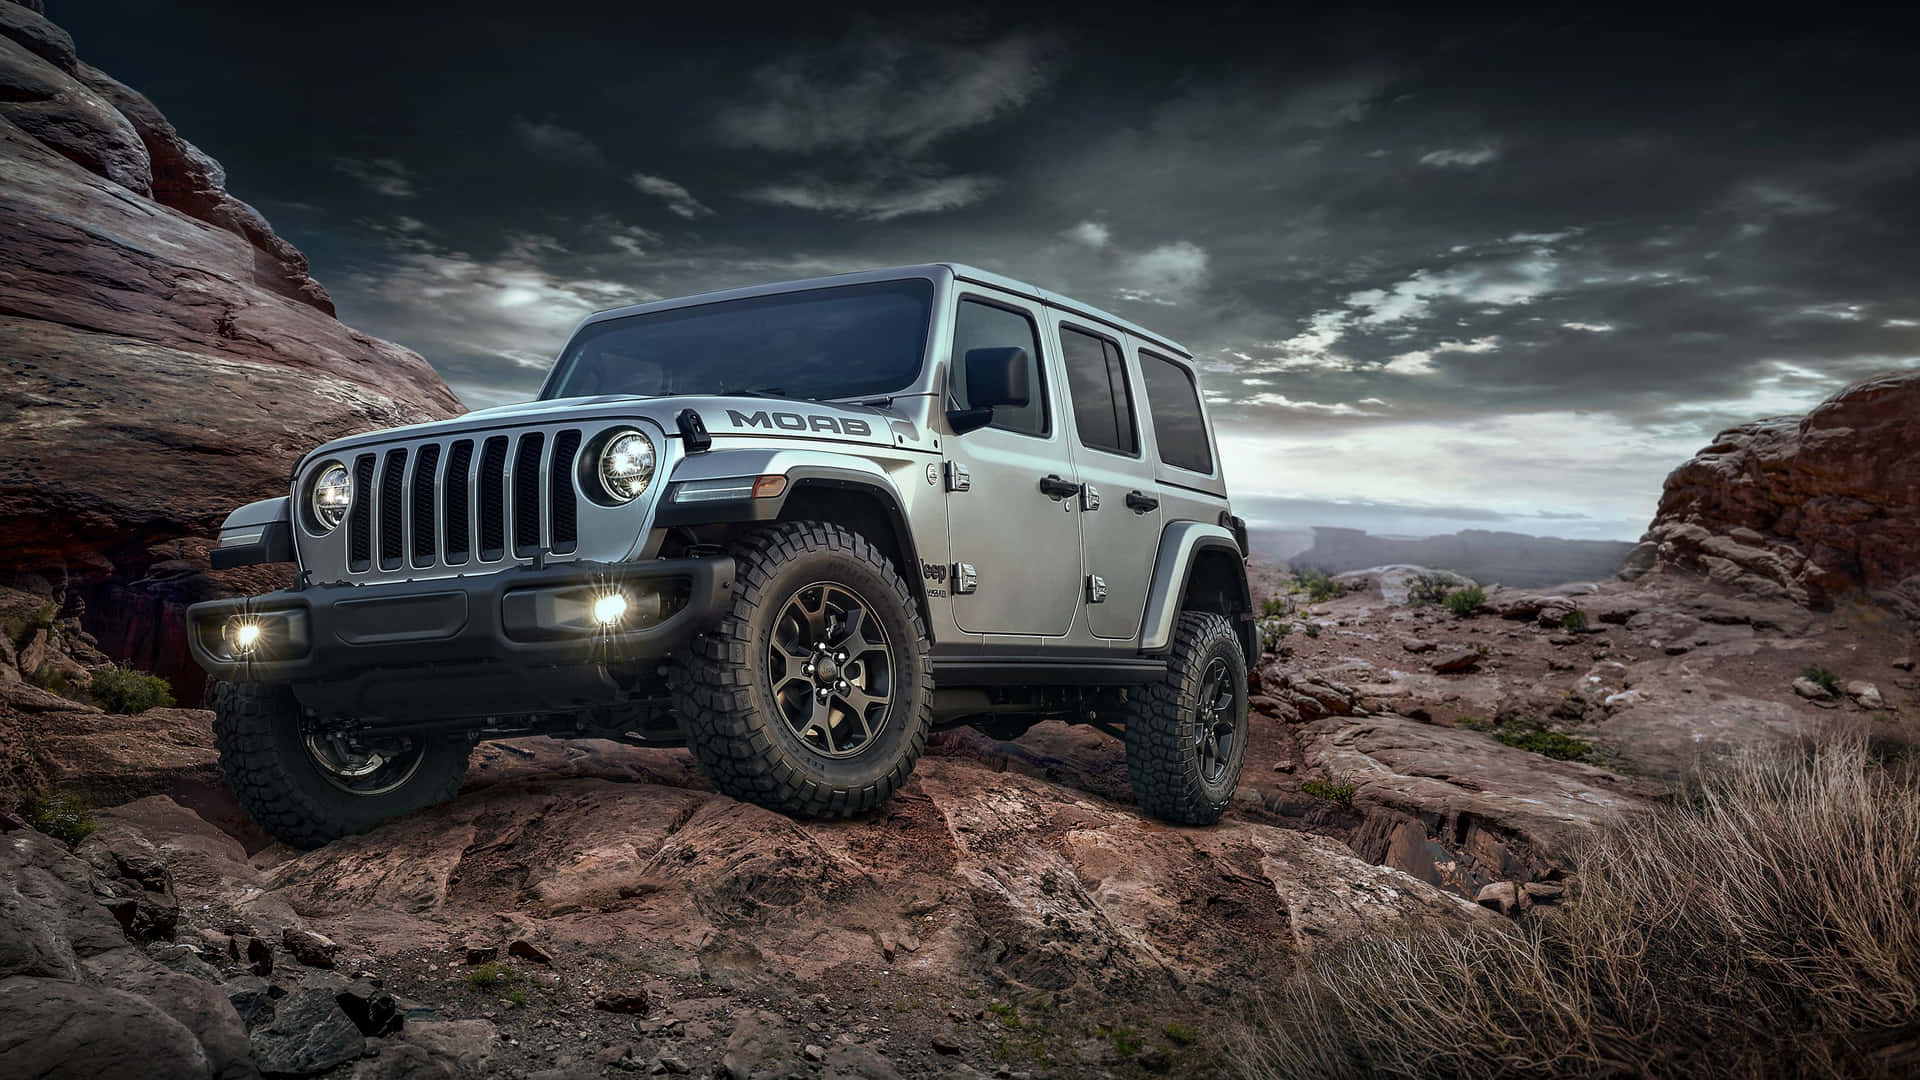 Take a Ride on the Wild Side with a Jeep